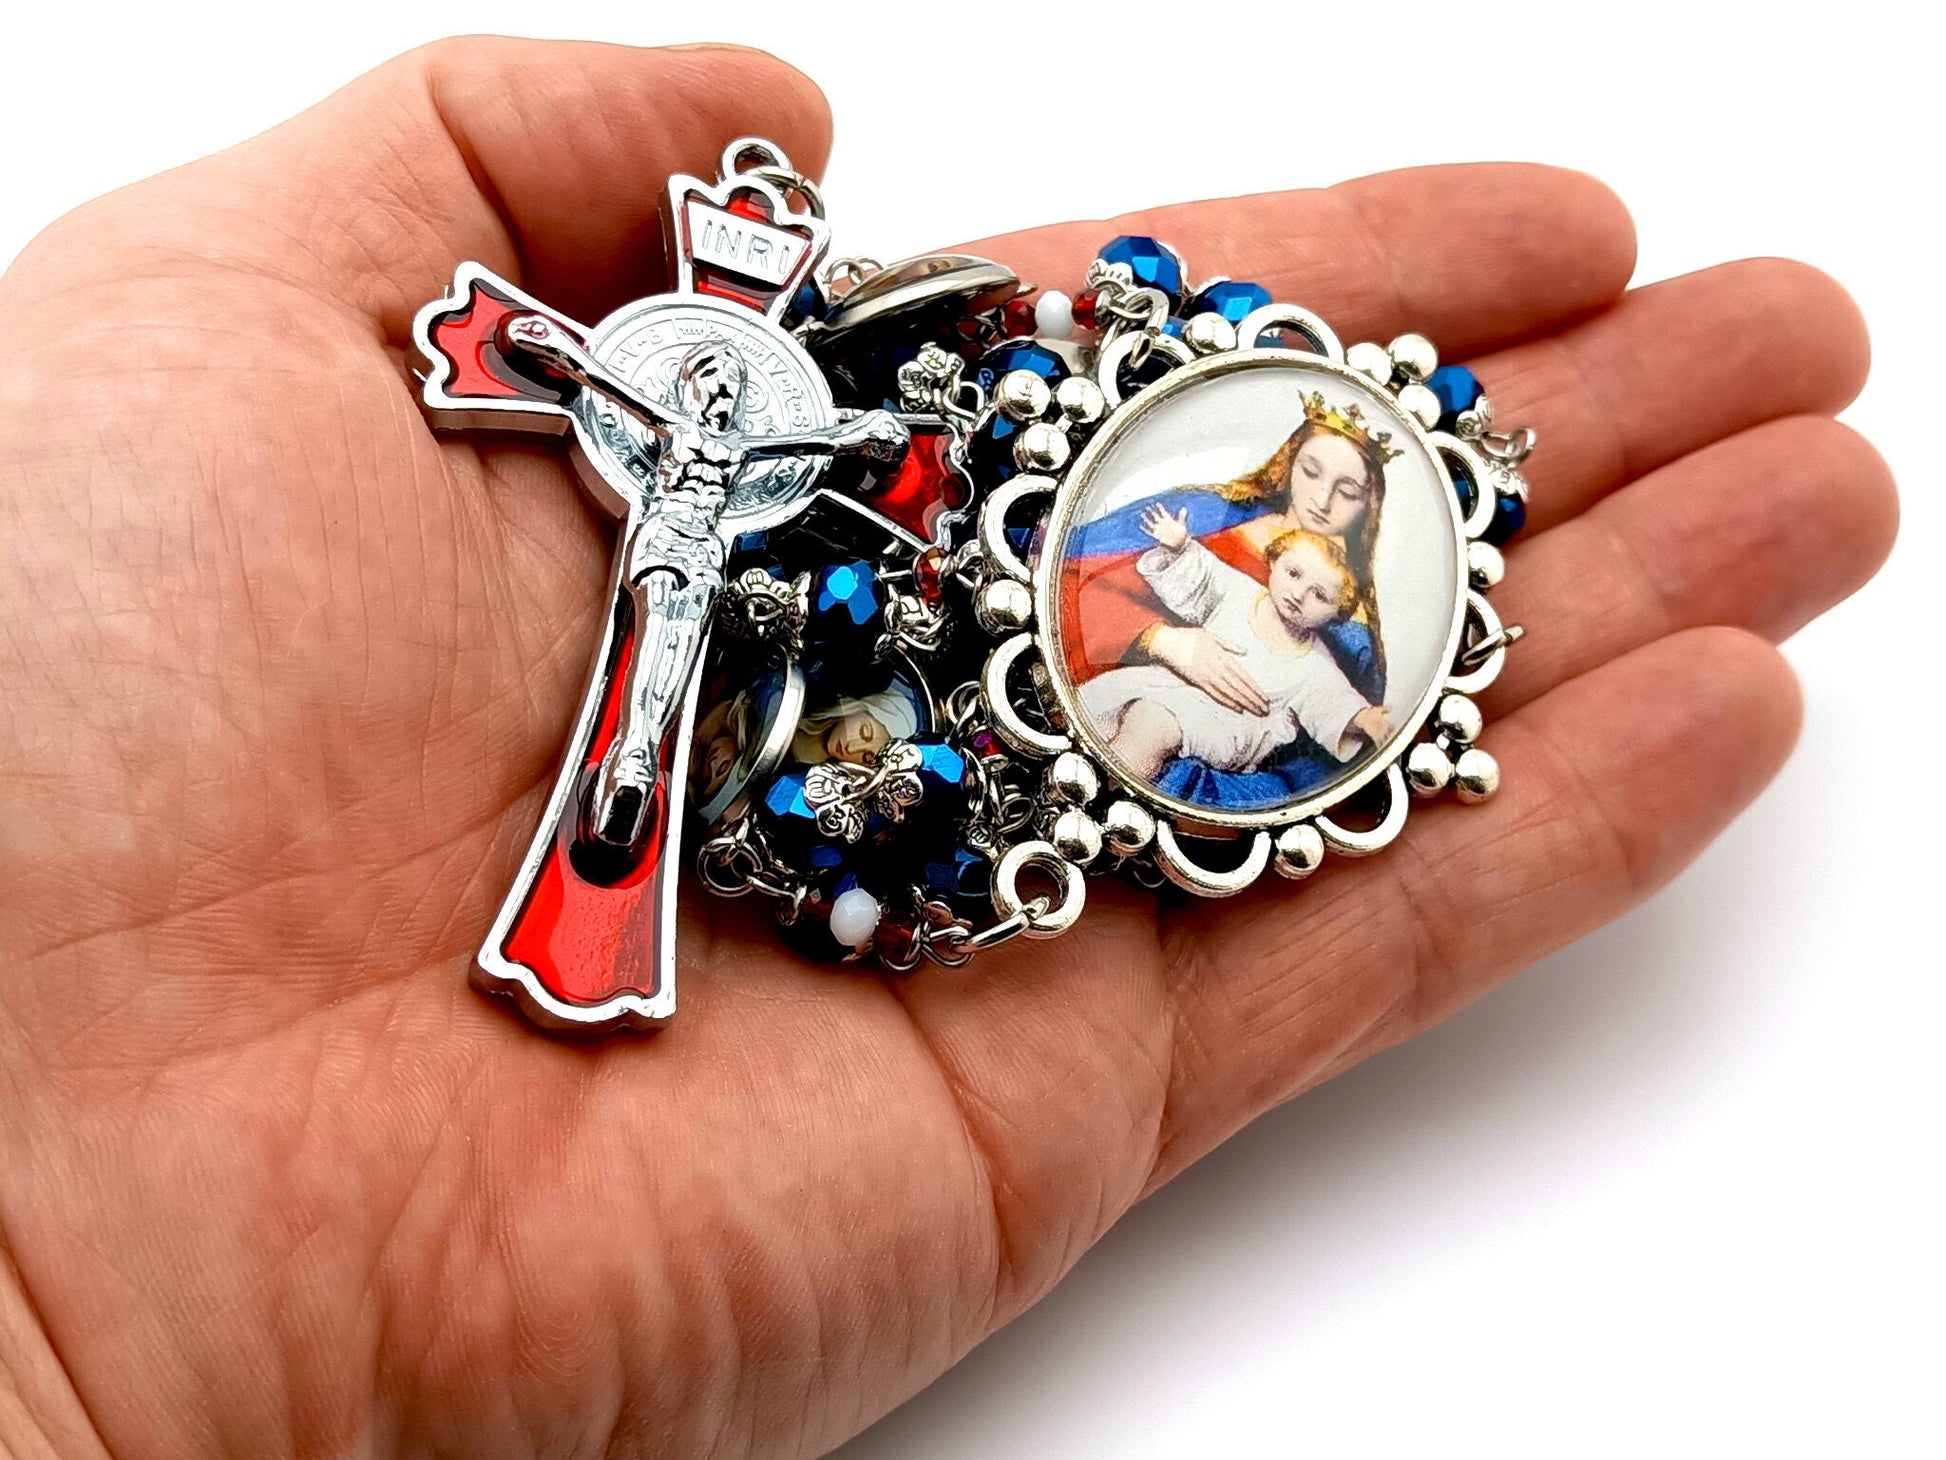 Virgin and Child unique rosary beads with blue and red glass beads and red enamel Saint Benedict crucifix.